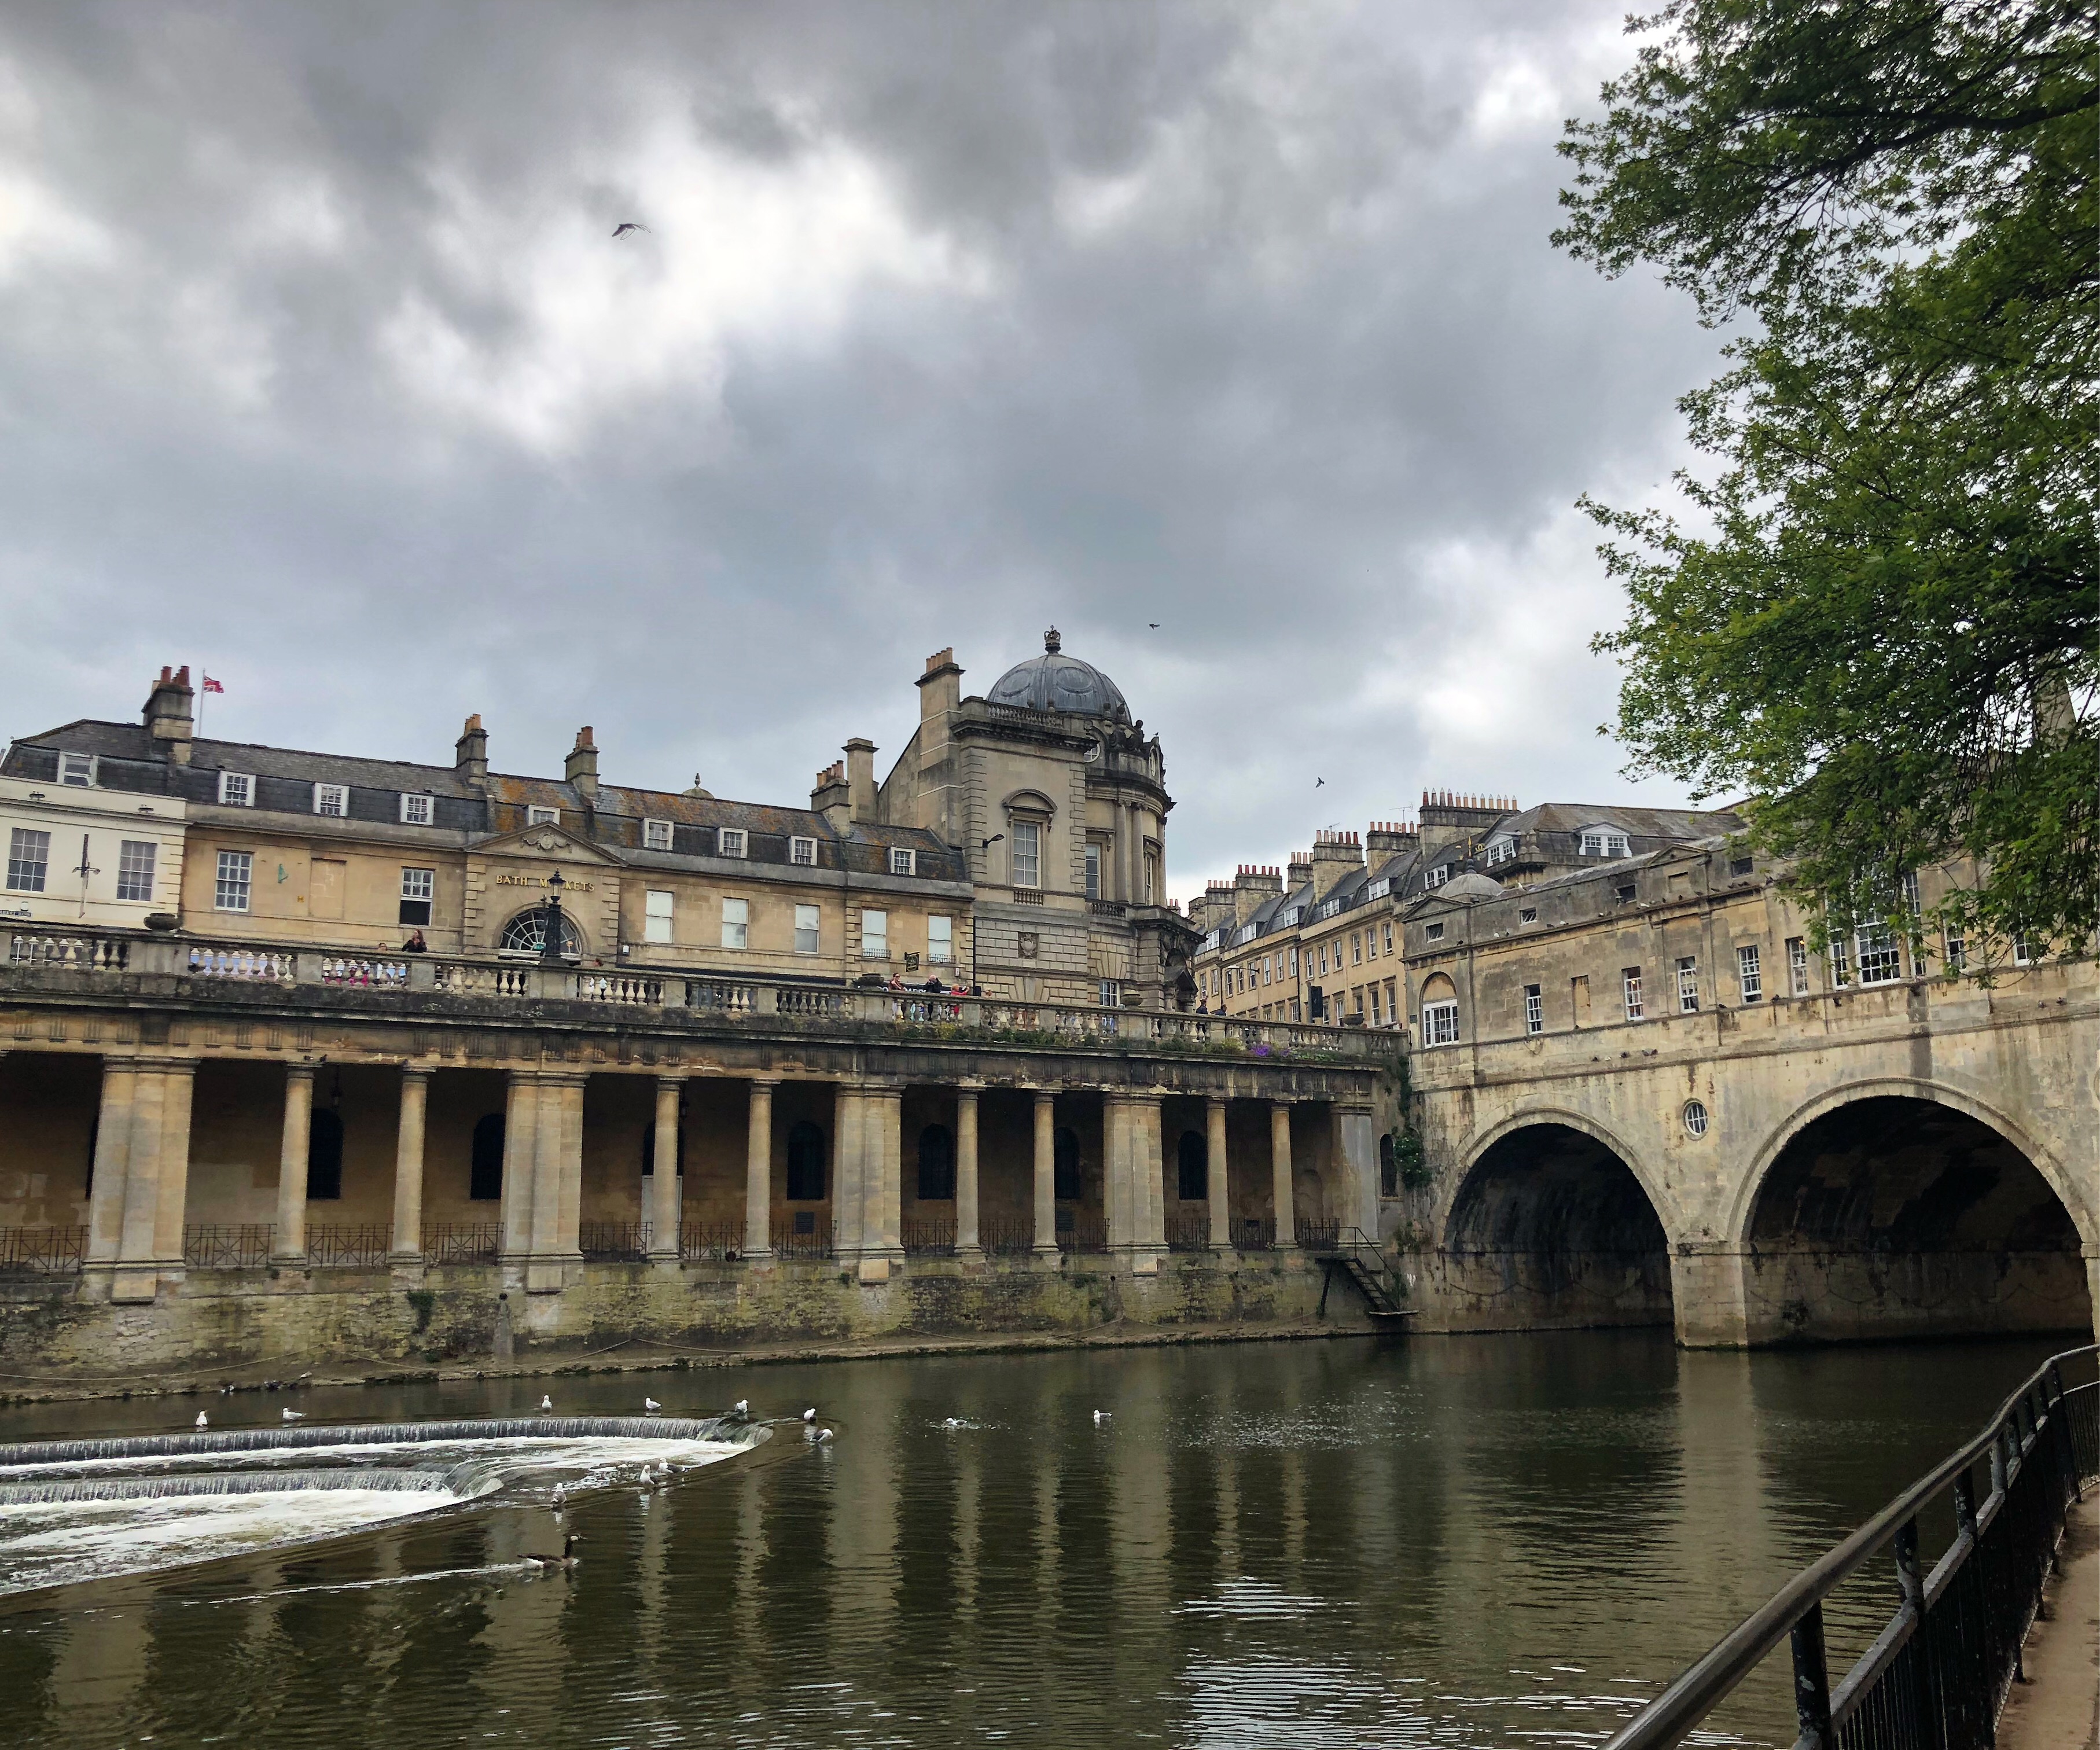 7 things to do in Bath, the land of Jane Austen